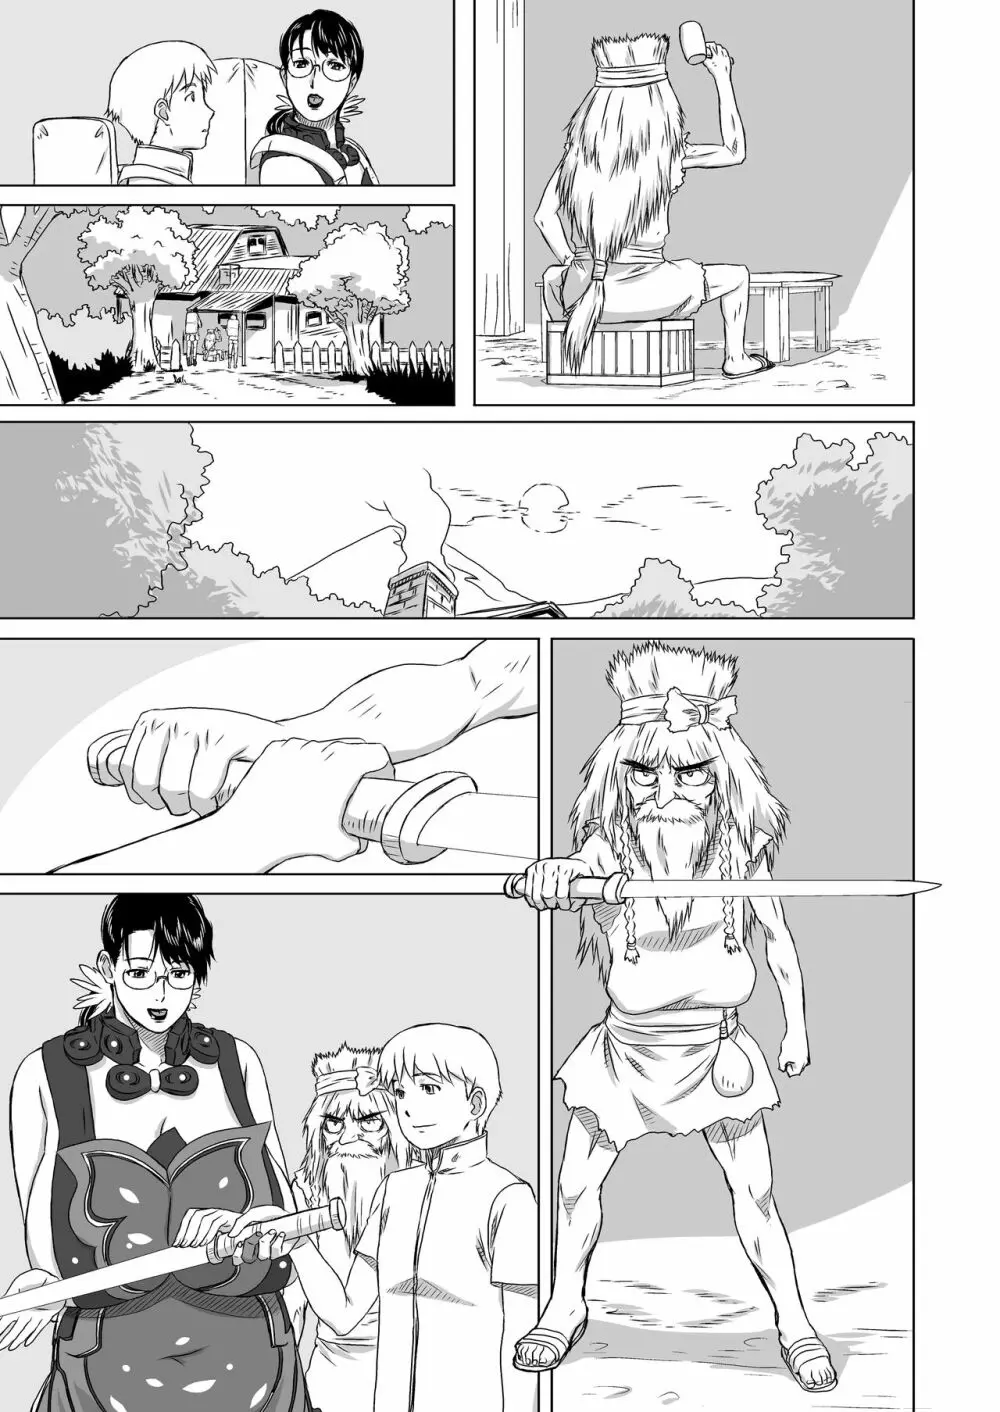 Package-Meat 7 - page7